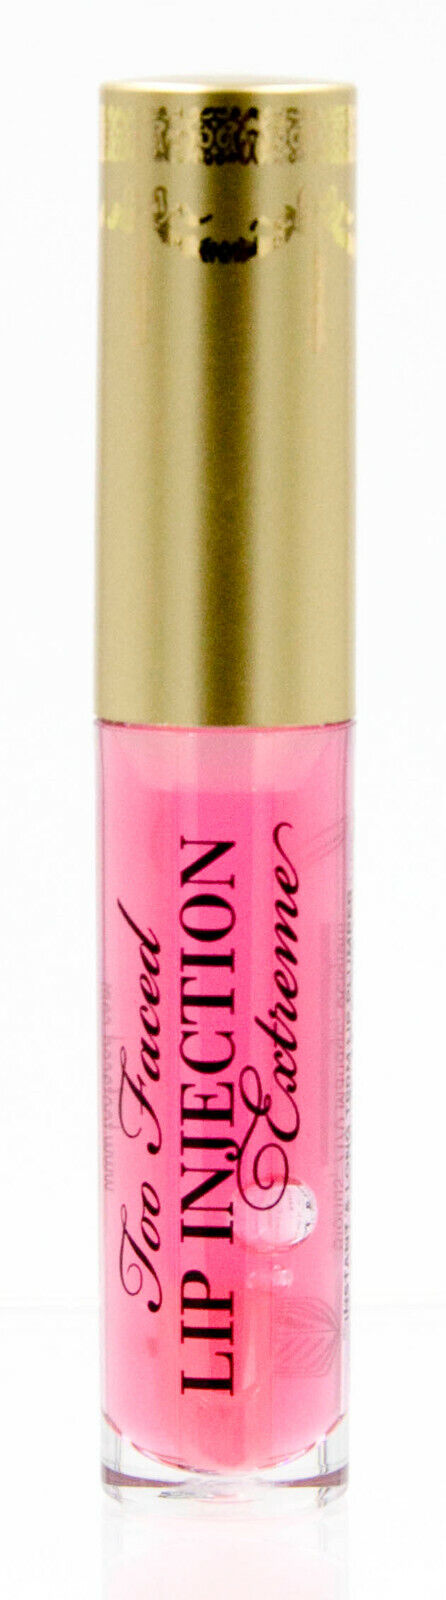 Too Faced Lip Injection Extreme Lip Plumper Bubblegum Yum Travel